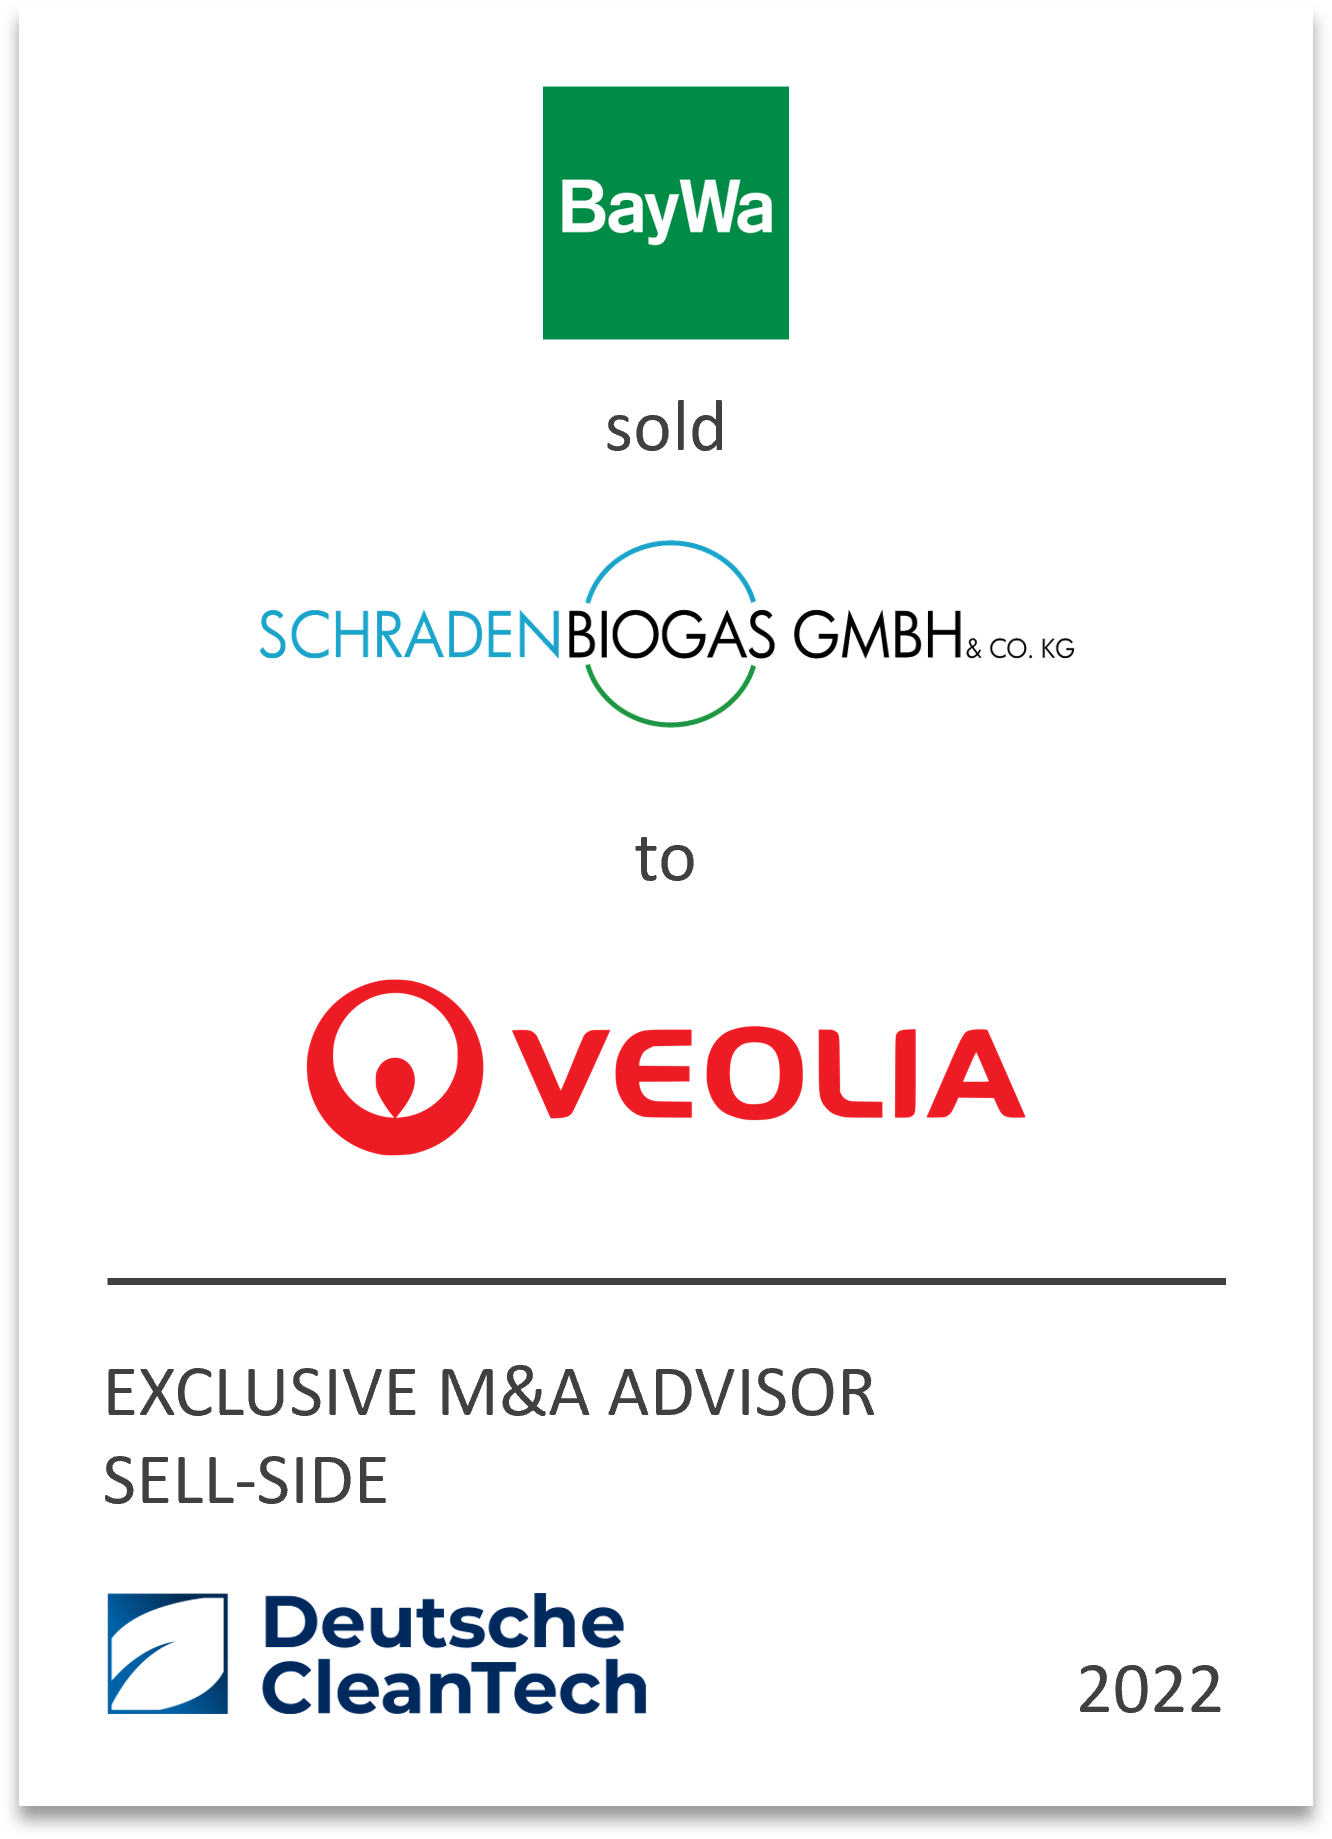 Veolia Environment SA acquires 94.5% of SCHRADENBIOGAS GmbH & CO KG from BayWa AG